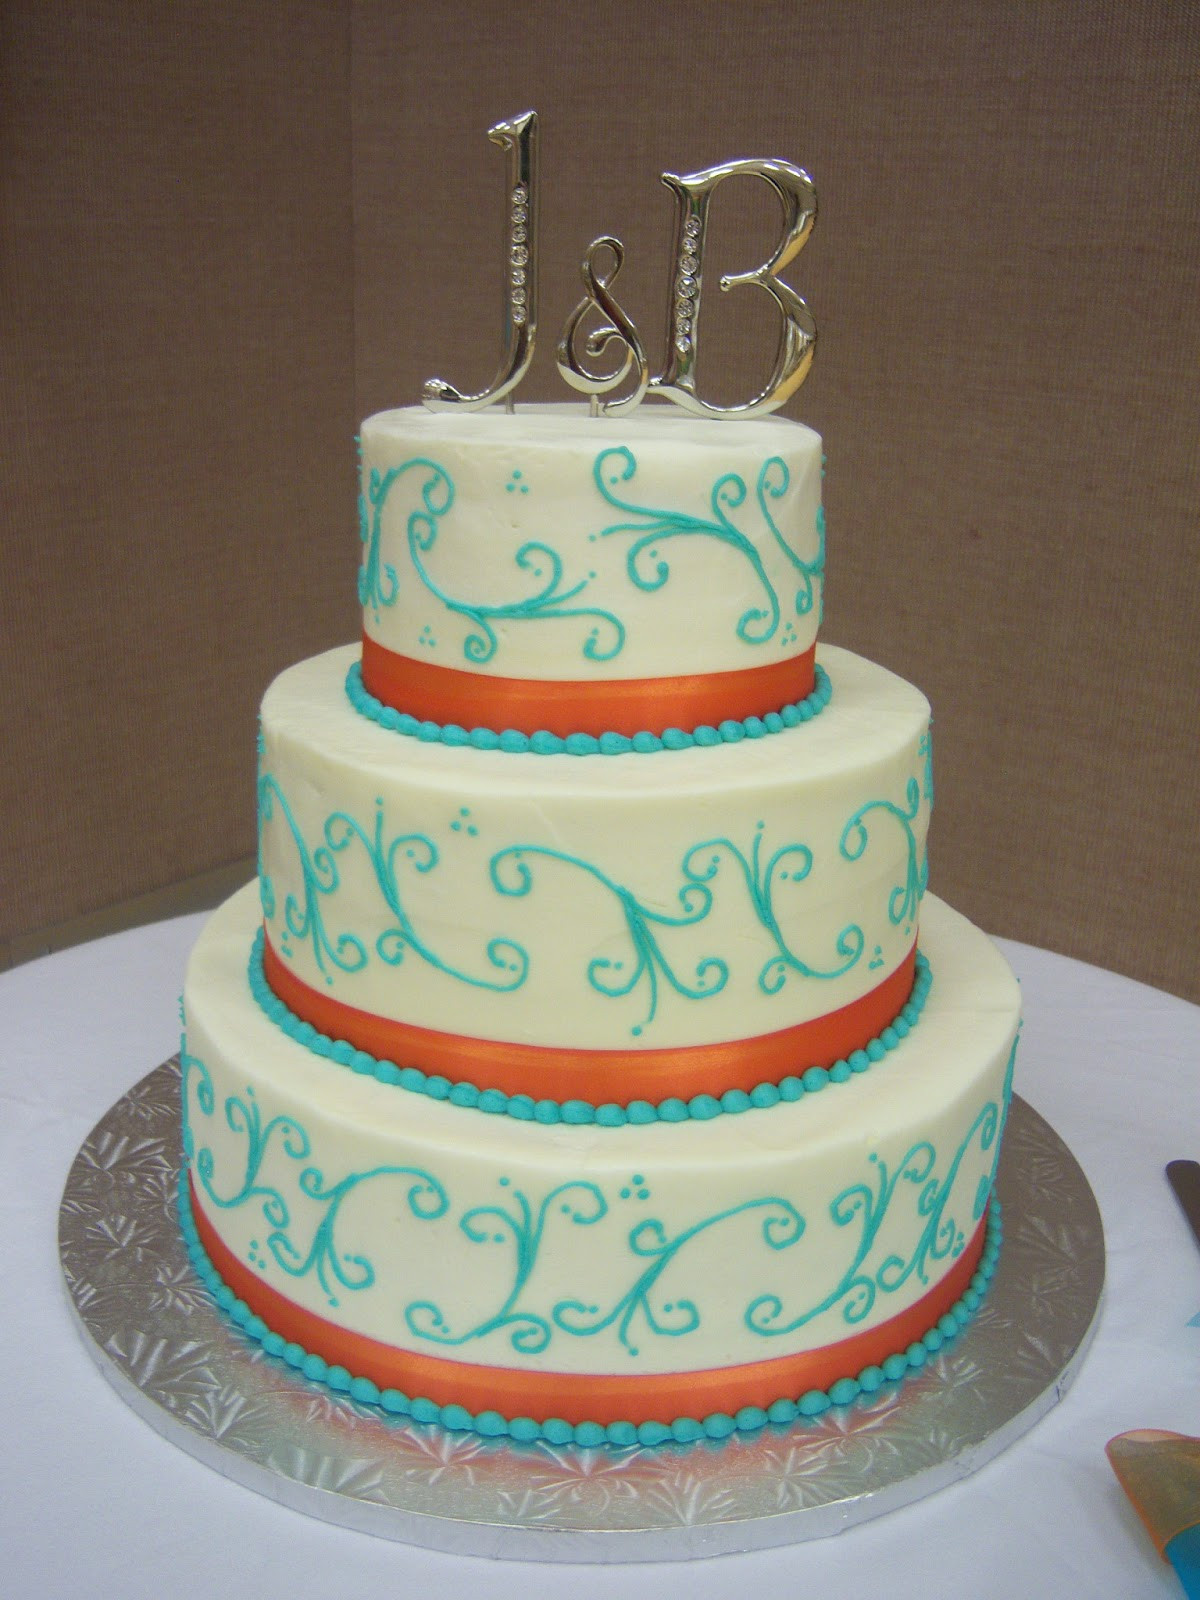 Turquoise Wedding Cakes
 Creative Cakes By Angela Turquoise and Orange Wedding Cake